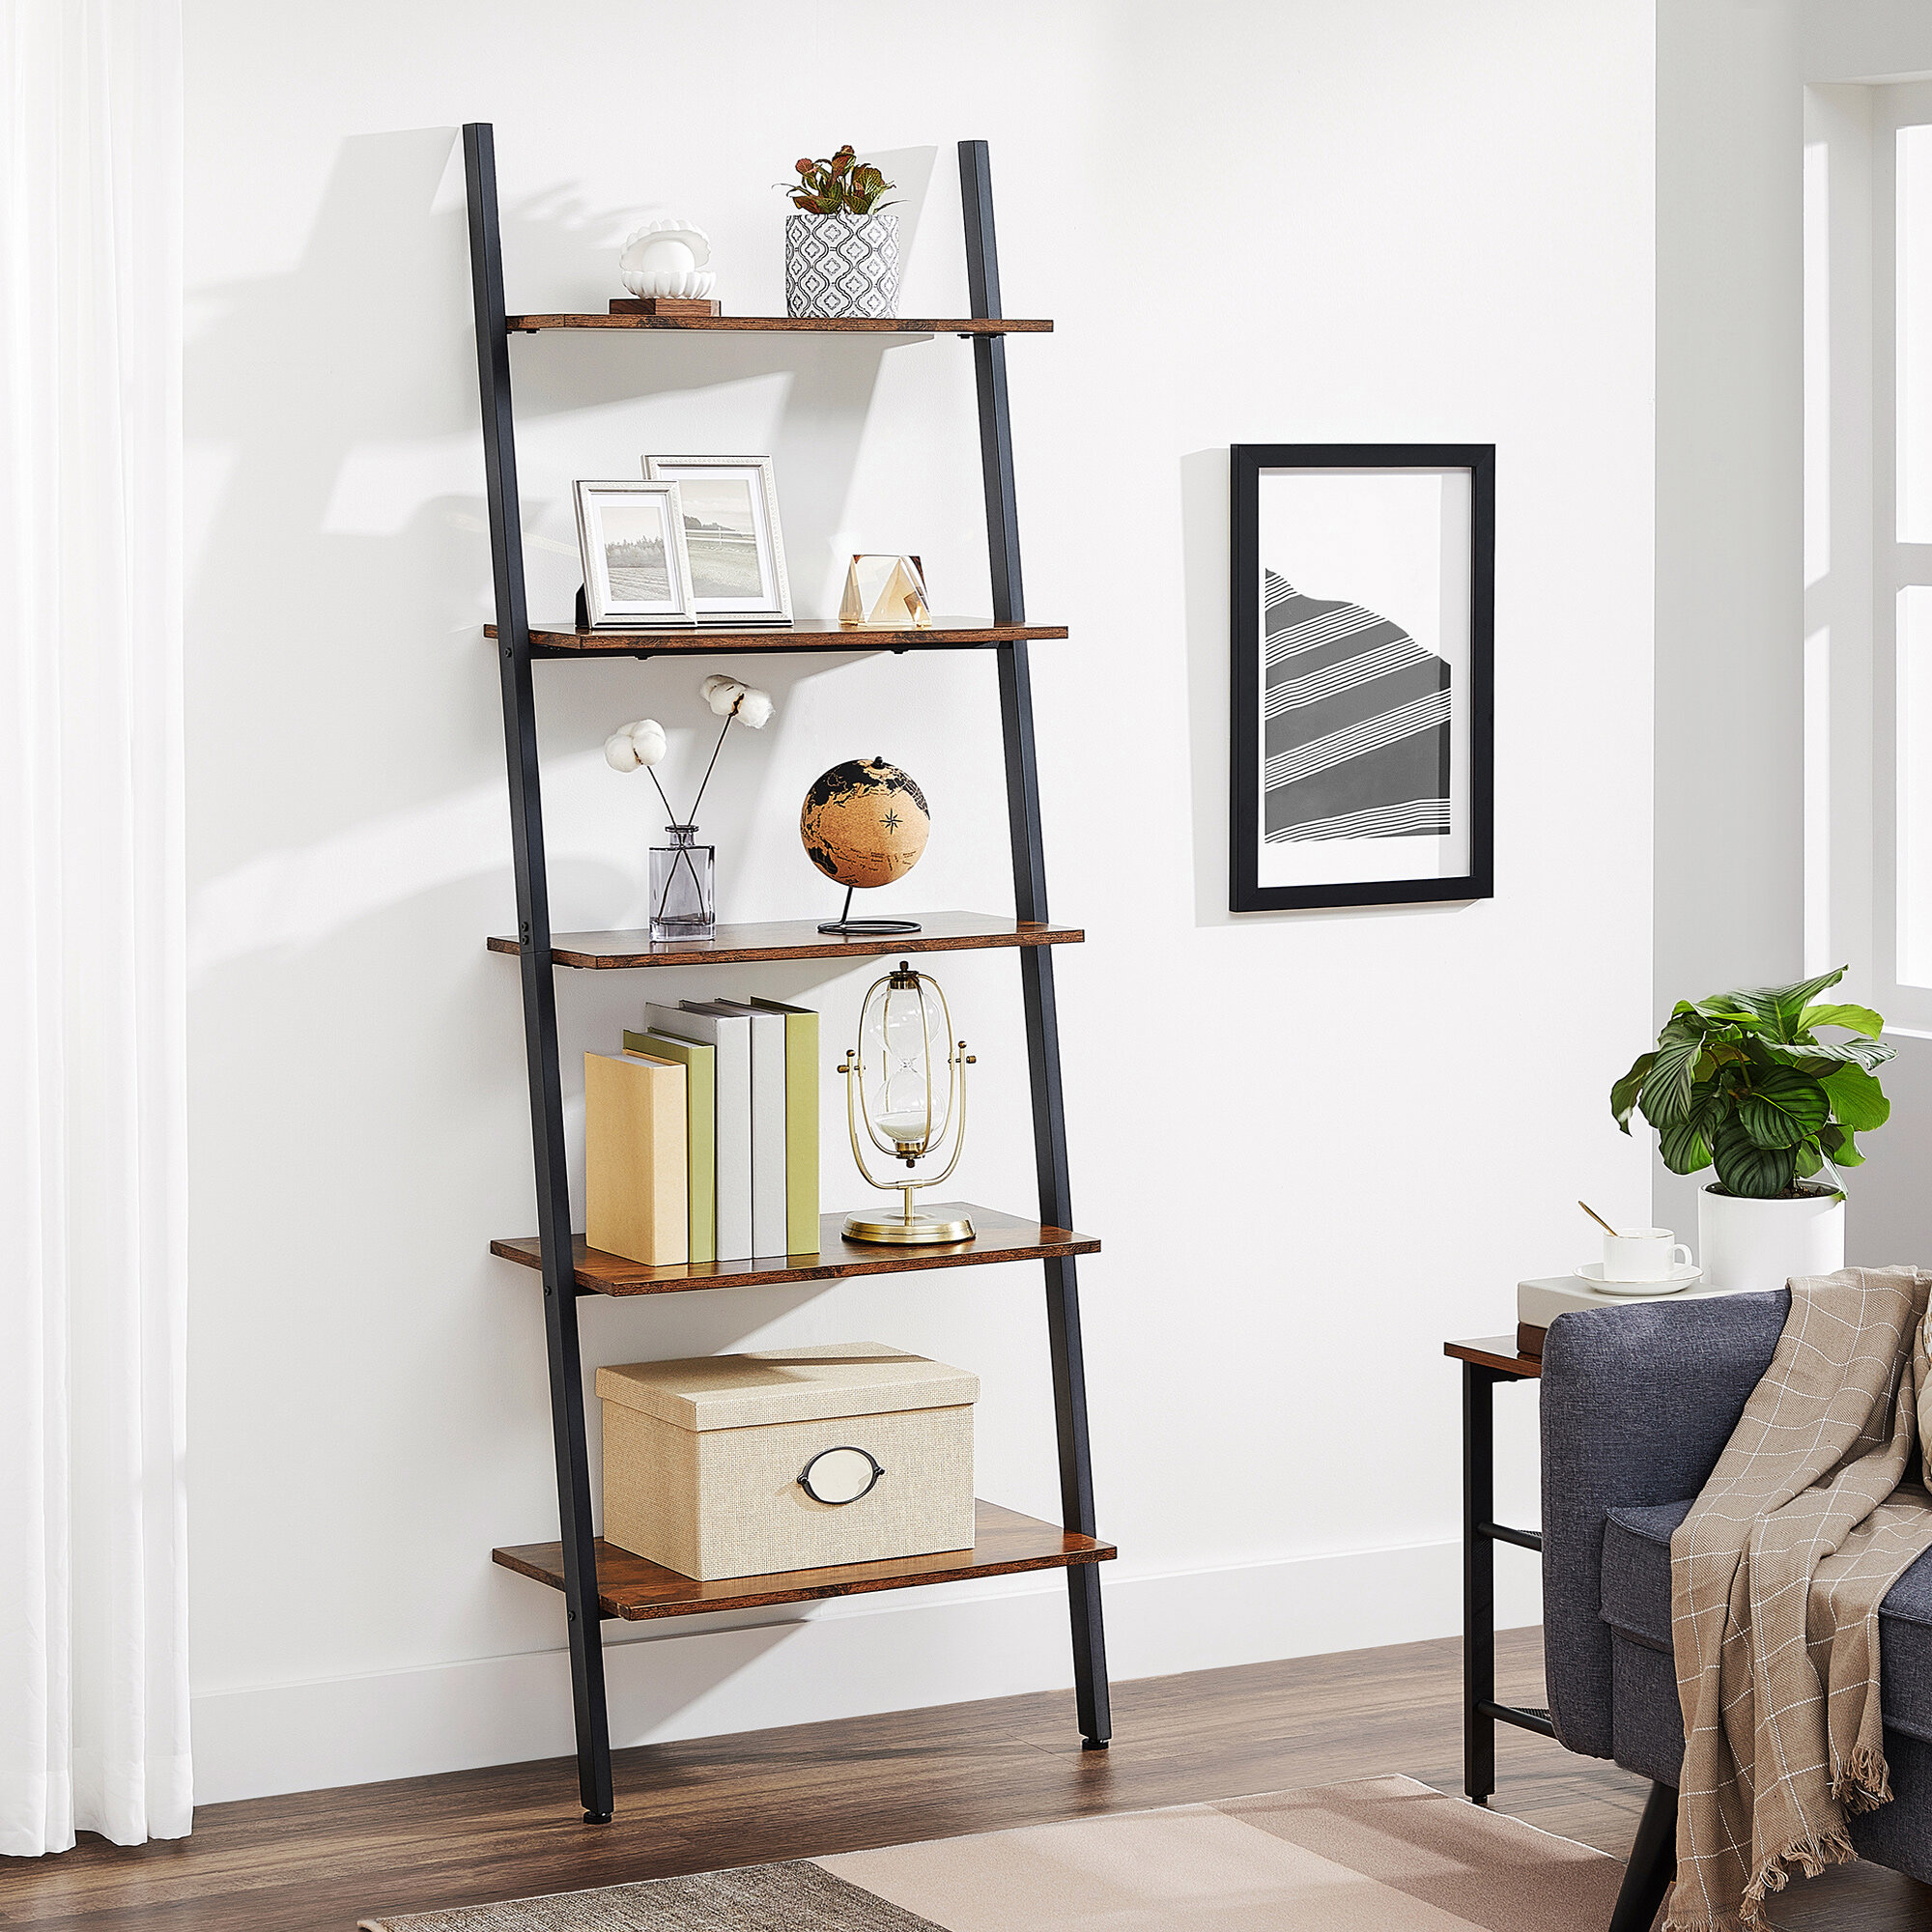 Details about   Bookshelf Leaning Metal Bookcase Storage Wall Ladder Multi Shelves Rustic Brown 